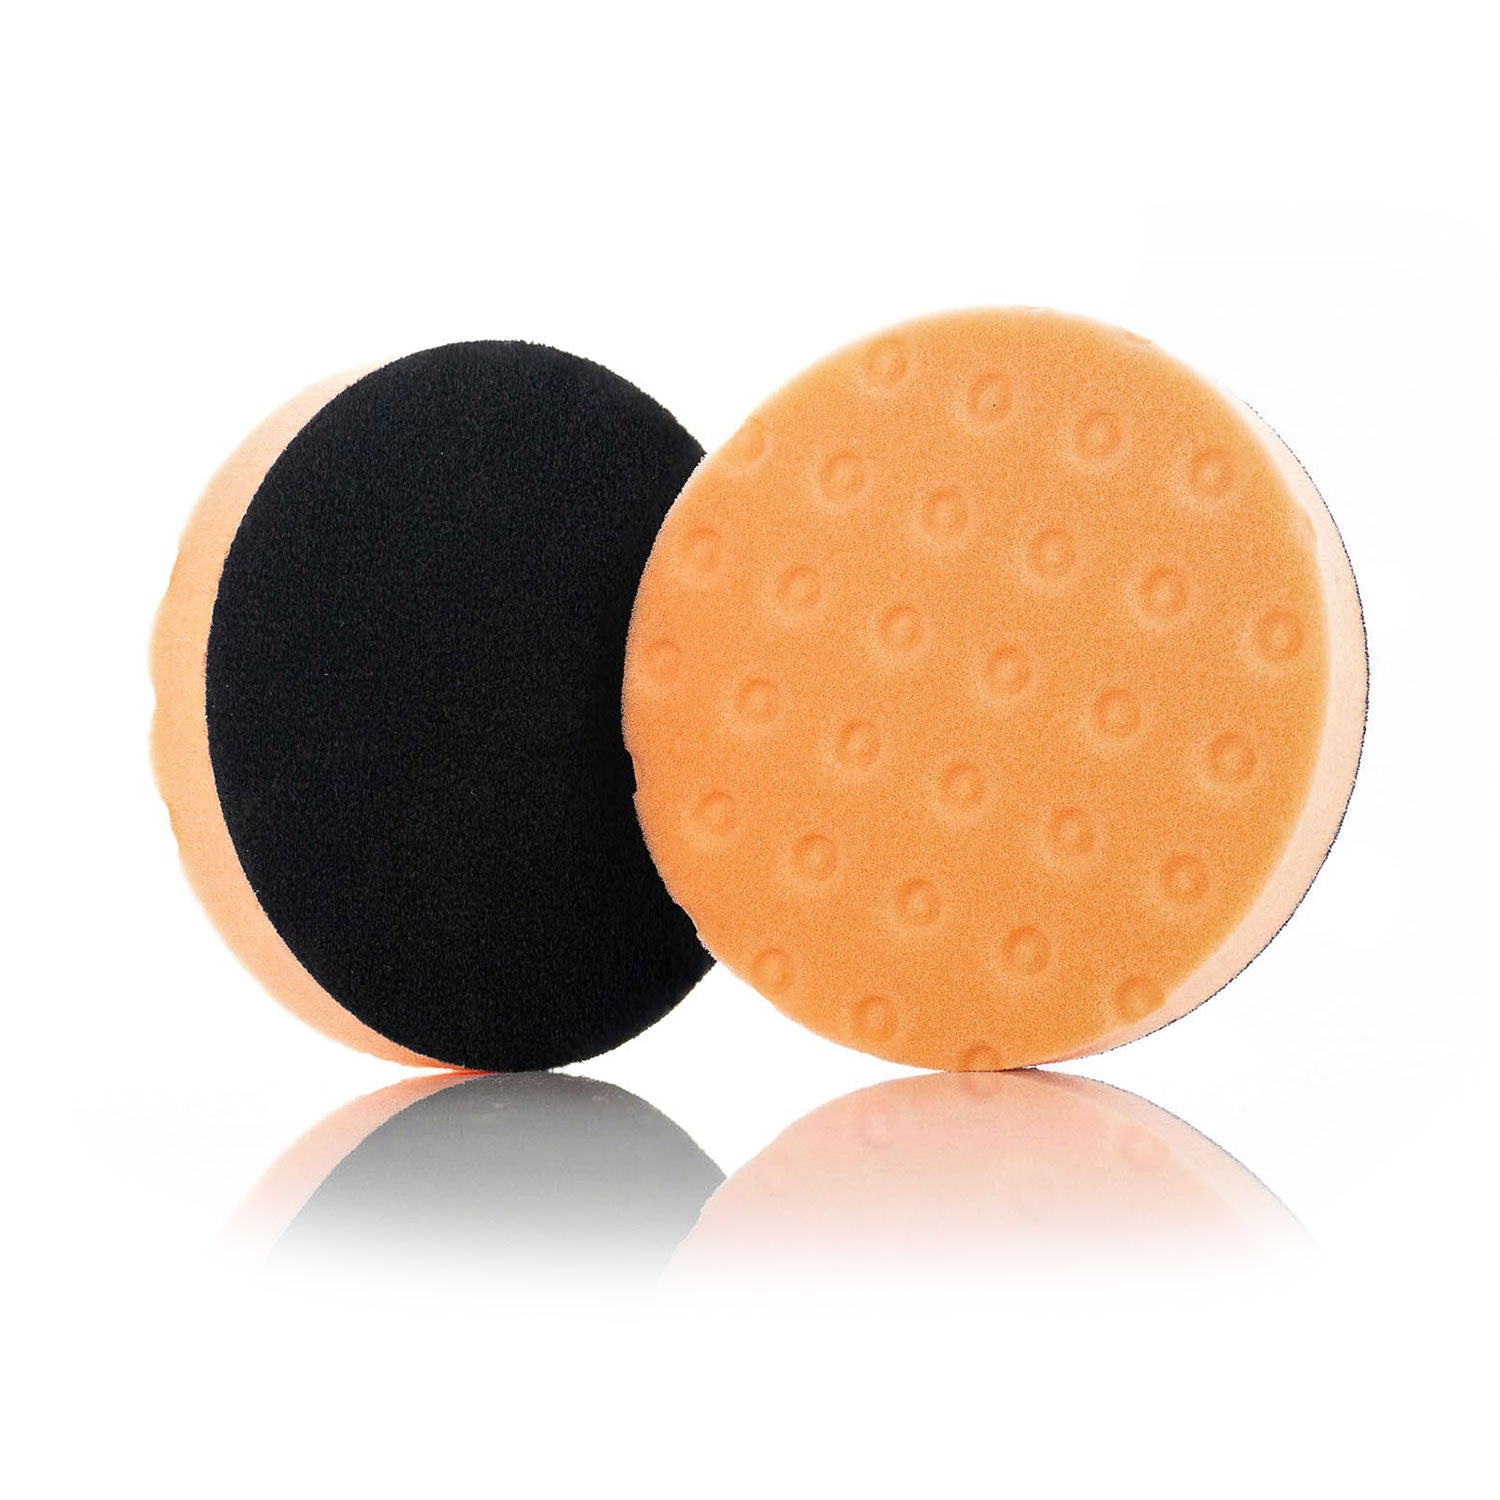 co6s-orange-foam-dimple-pads-for-cutting-and-polishing-5-inches